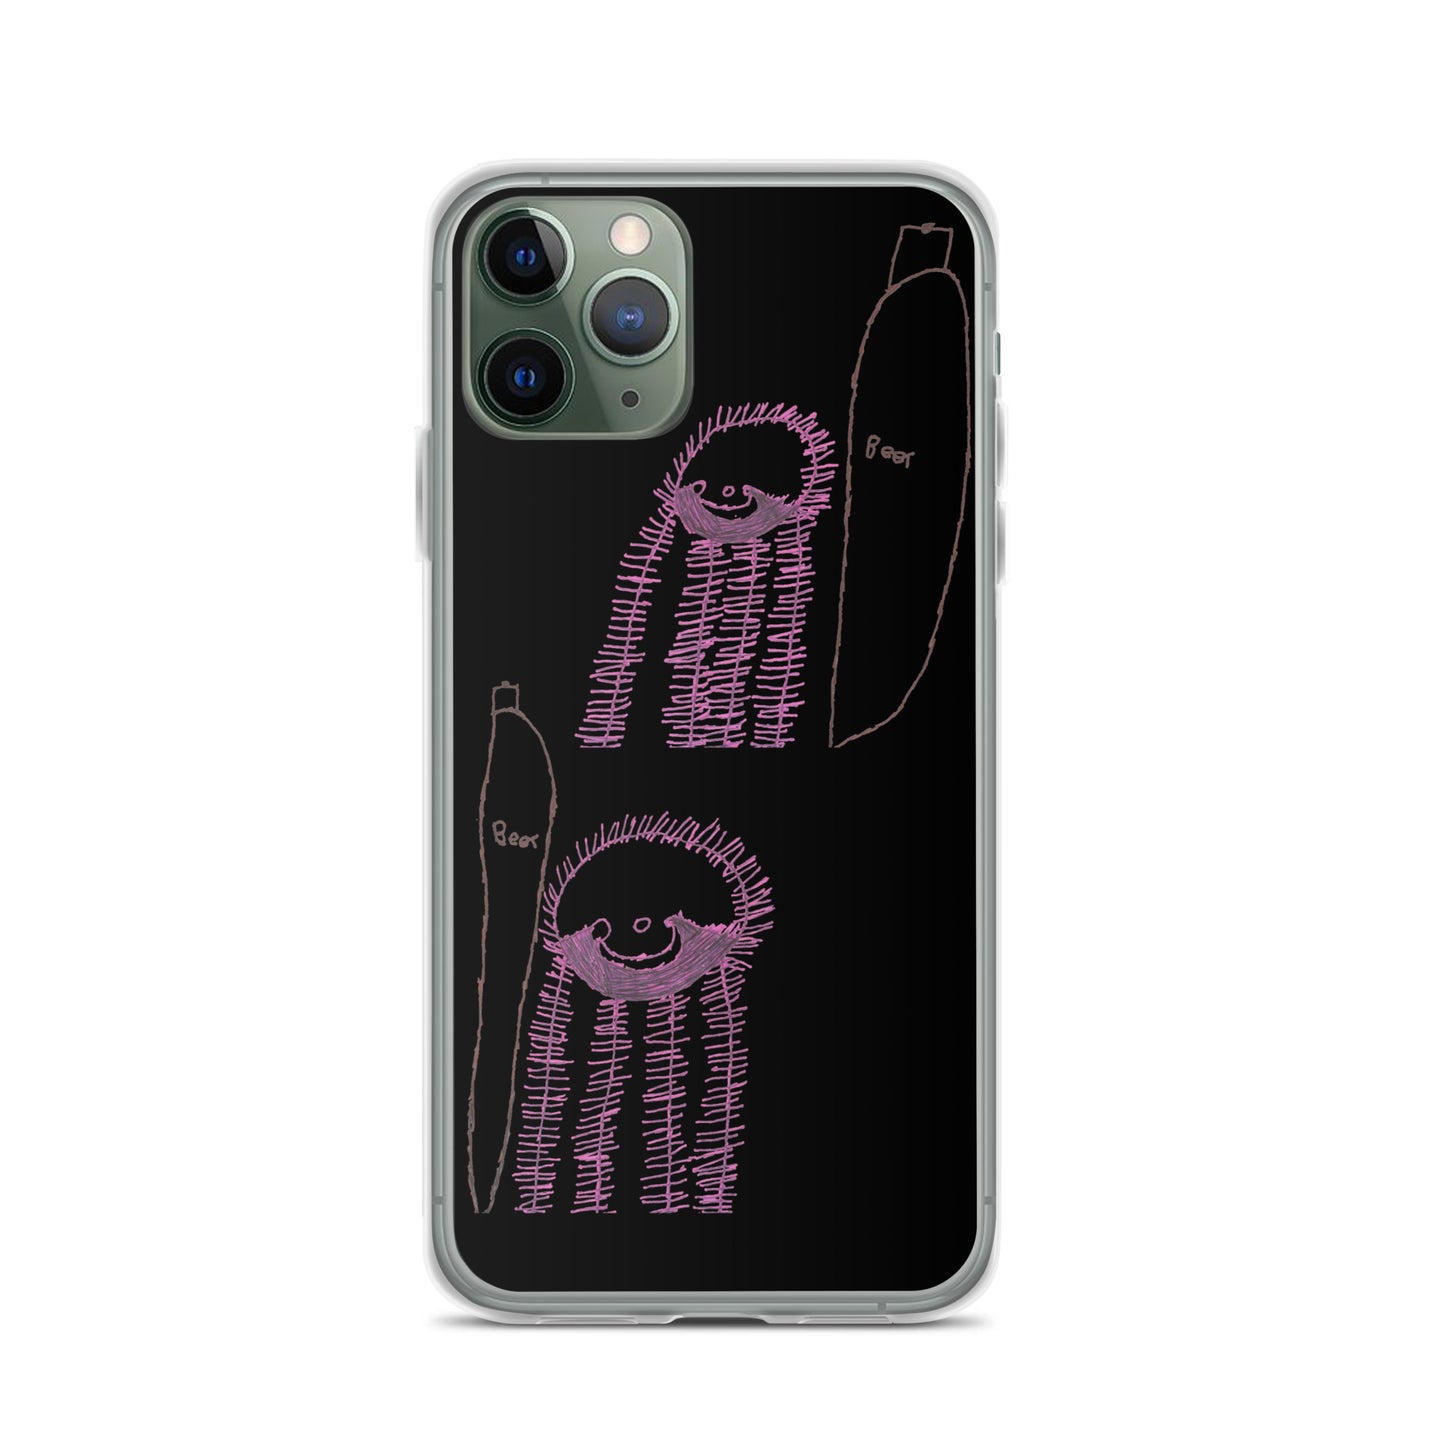 iPhone Case - "Drinking Beer With Dad"